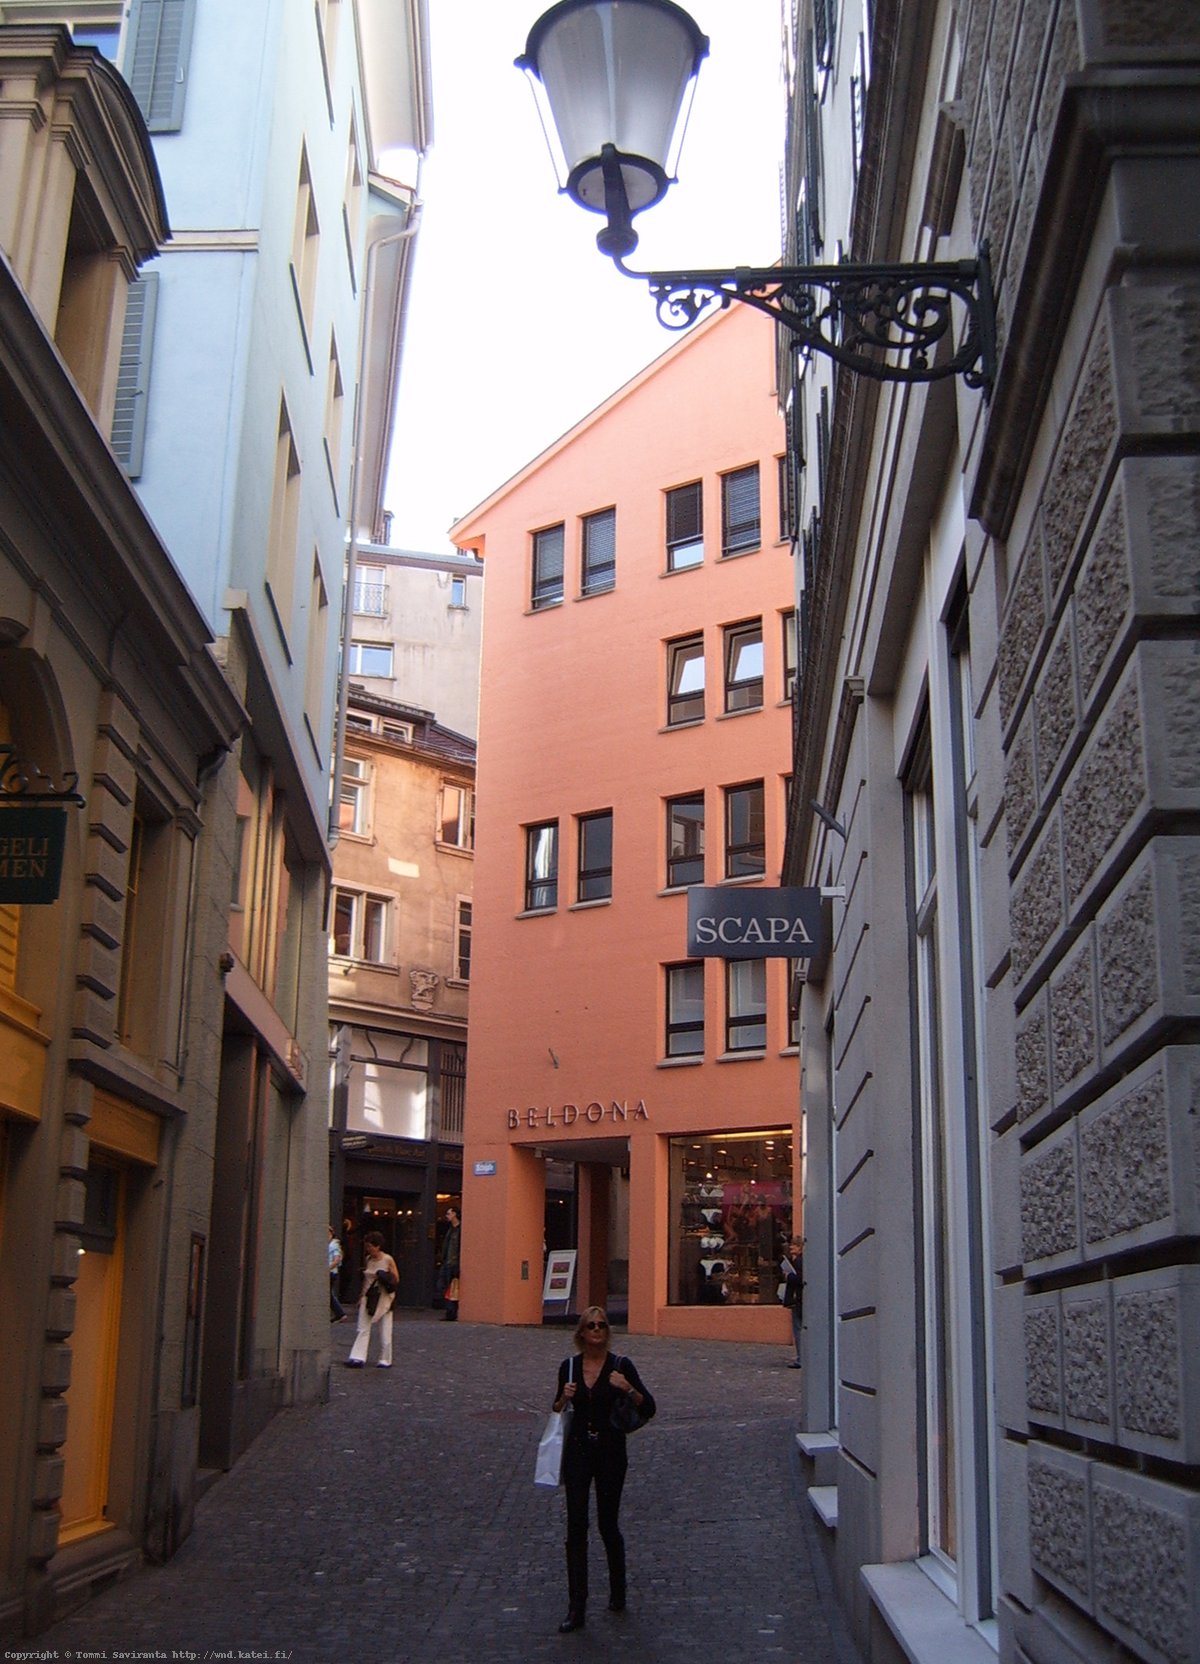 Day #5: Narrow streets of old Zürich